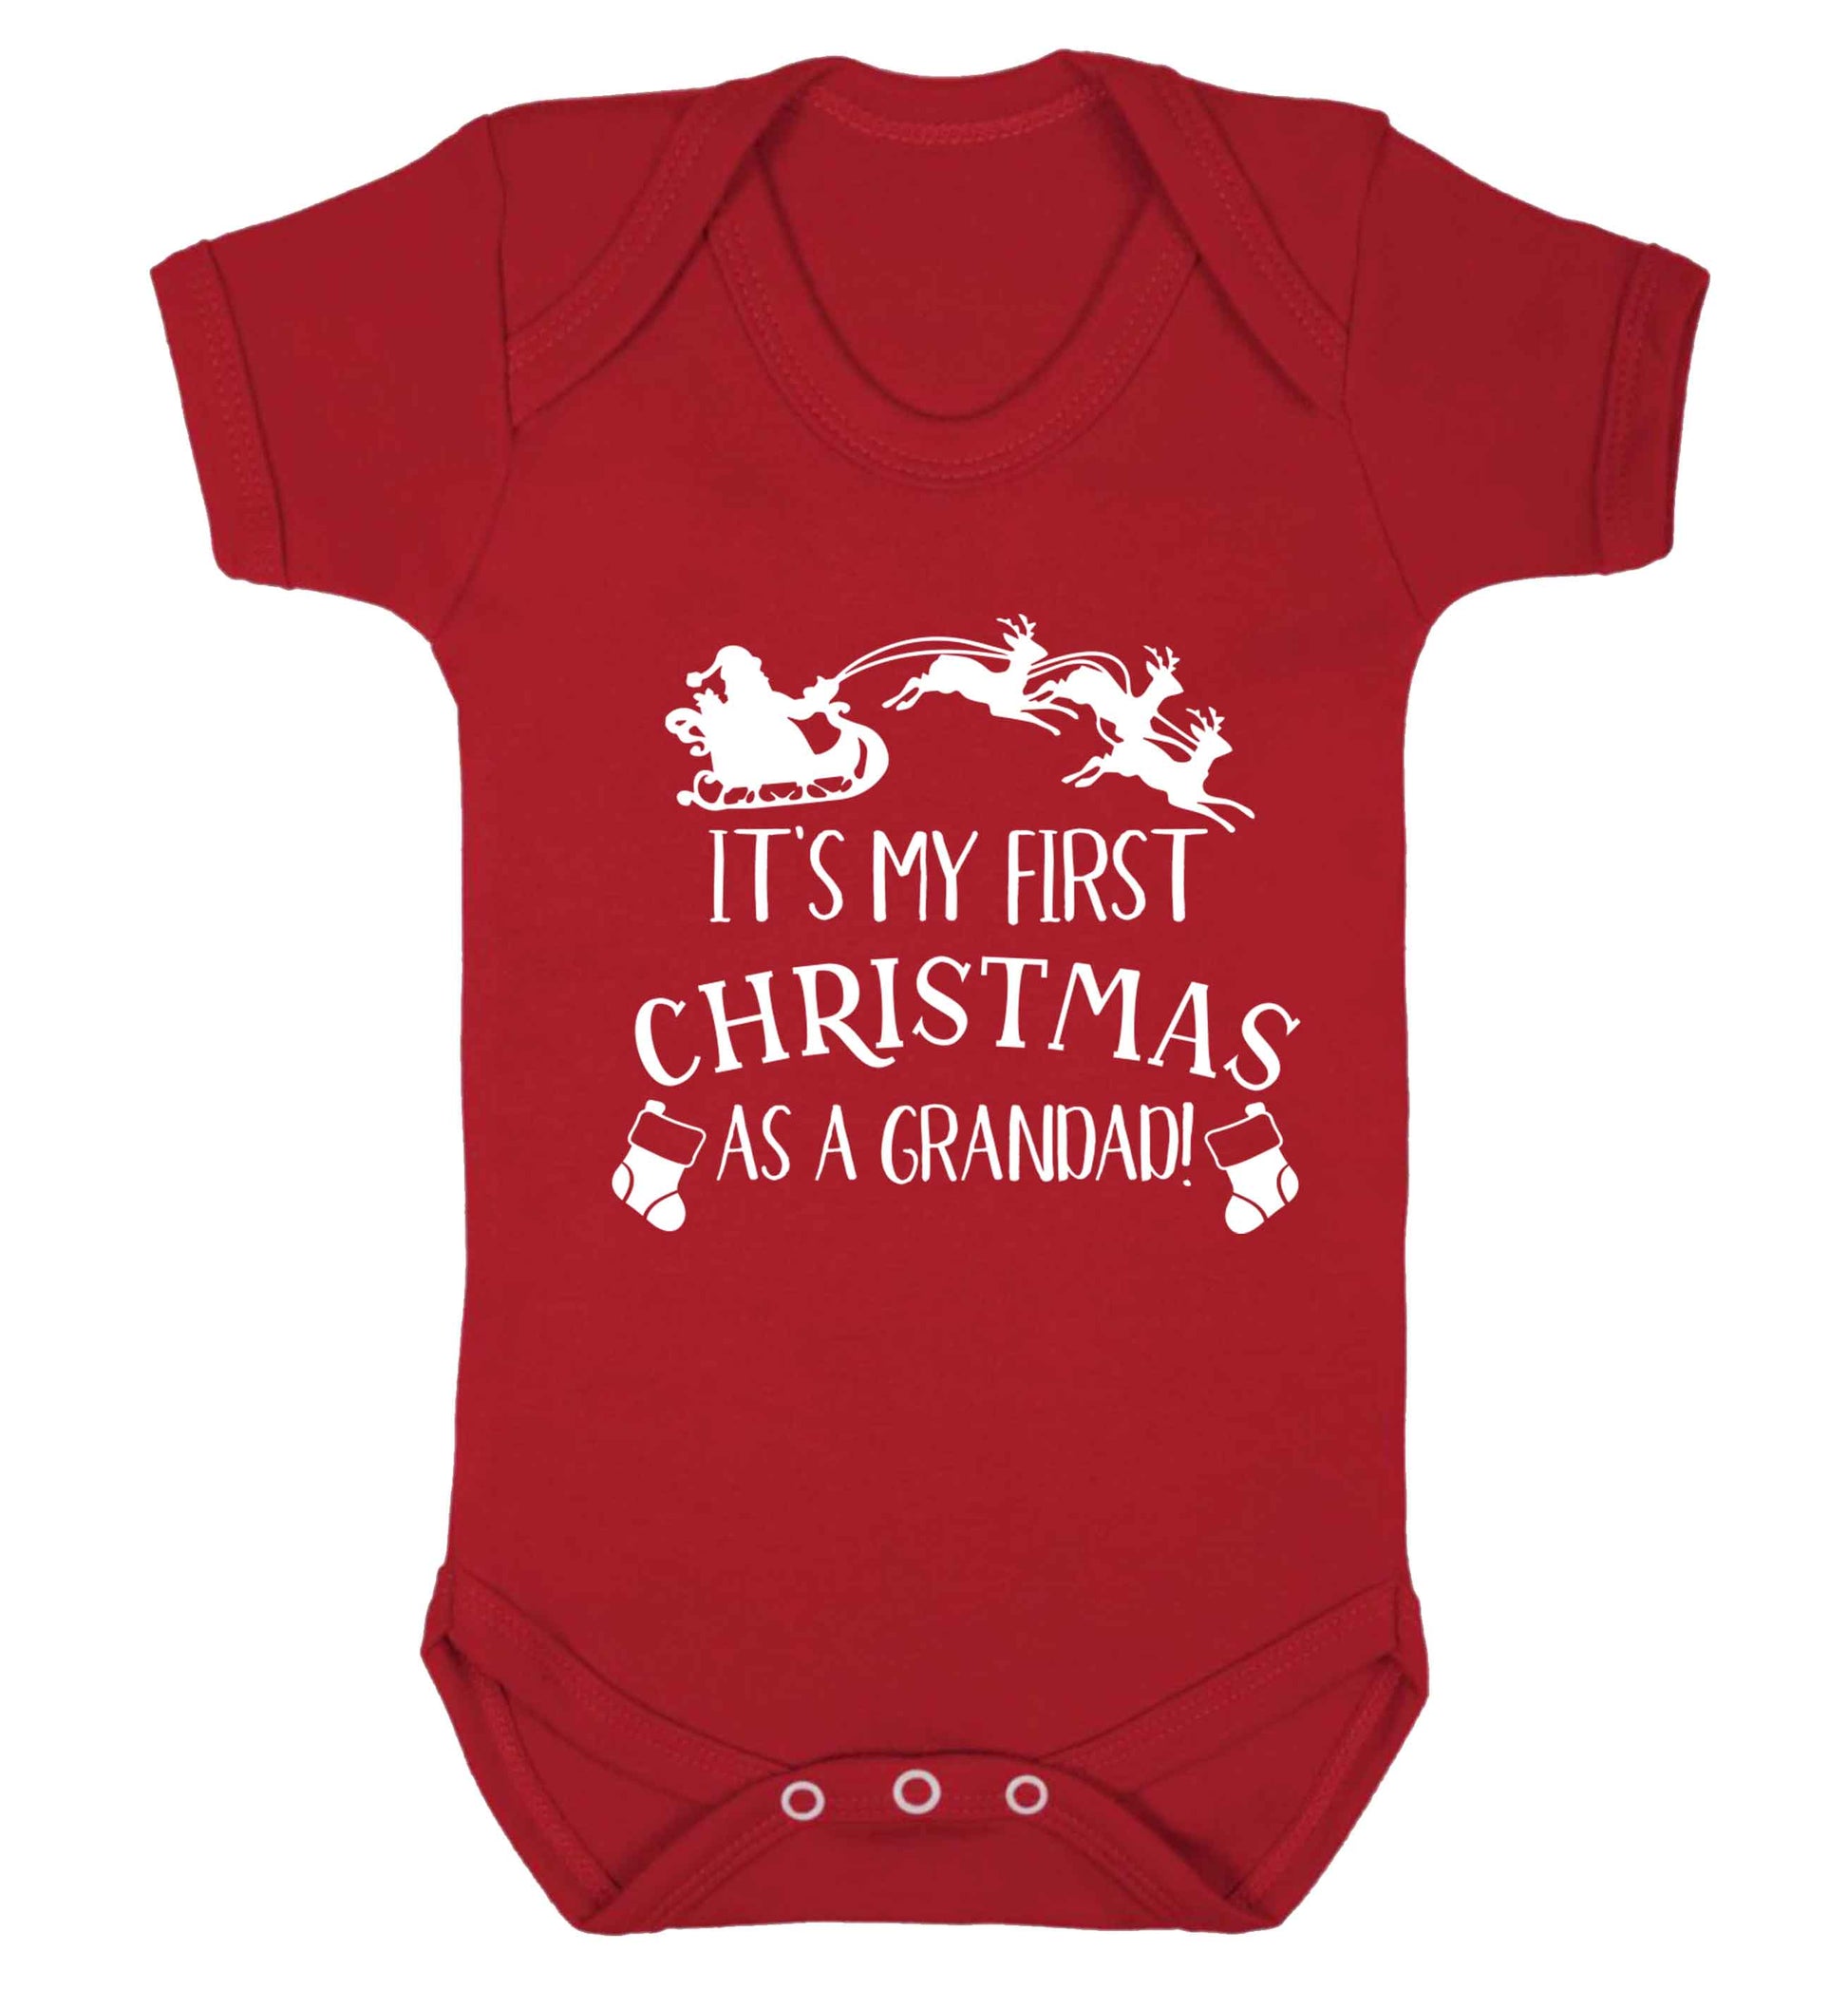 It's my first Christmas as a grandad! Baby Vest red 18-24 months